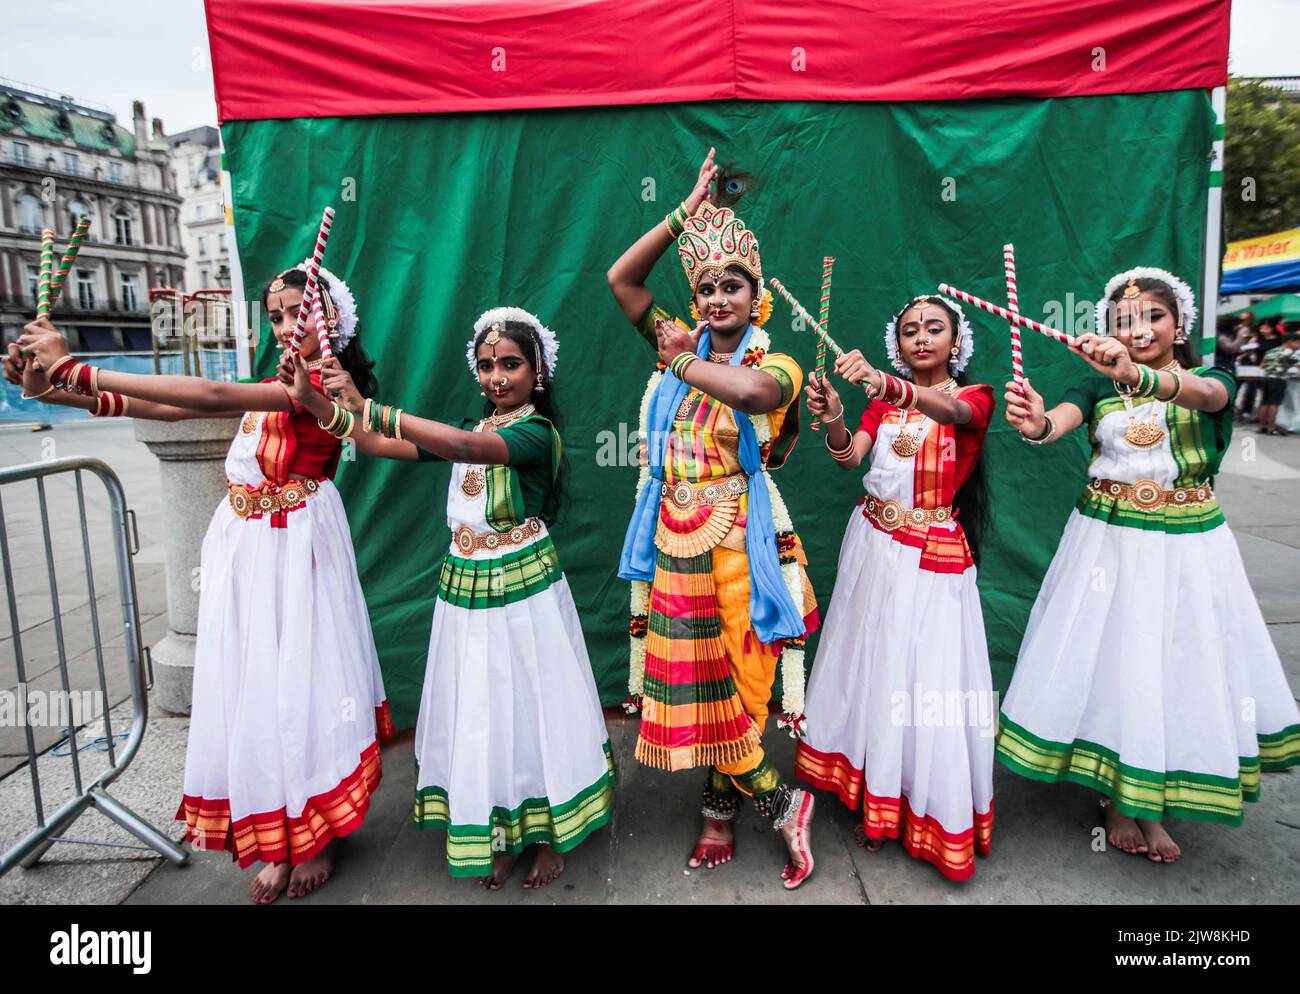 London UK 4 Sep 2022 The colourful religious event of Rathayatra in London Trafalgar Square ,Brough the Hare Krishna flowers to gather in celebration with music ,dancing, and a sea of color. Paul Quezada-Neiman/Alamy Live News Stock Photo